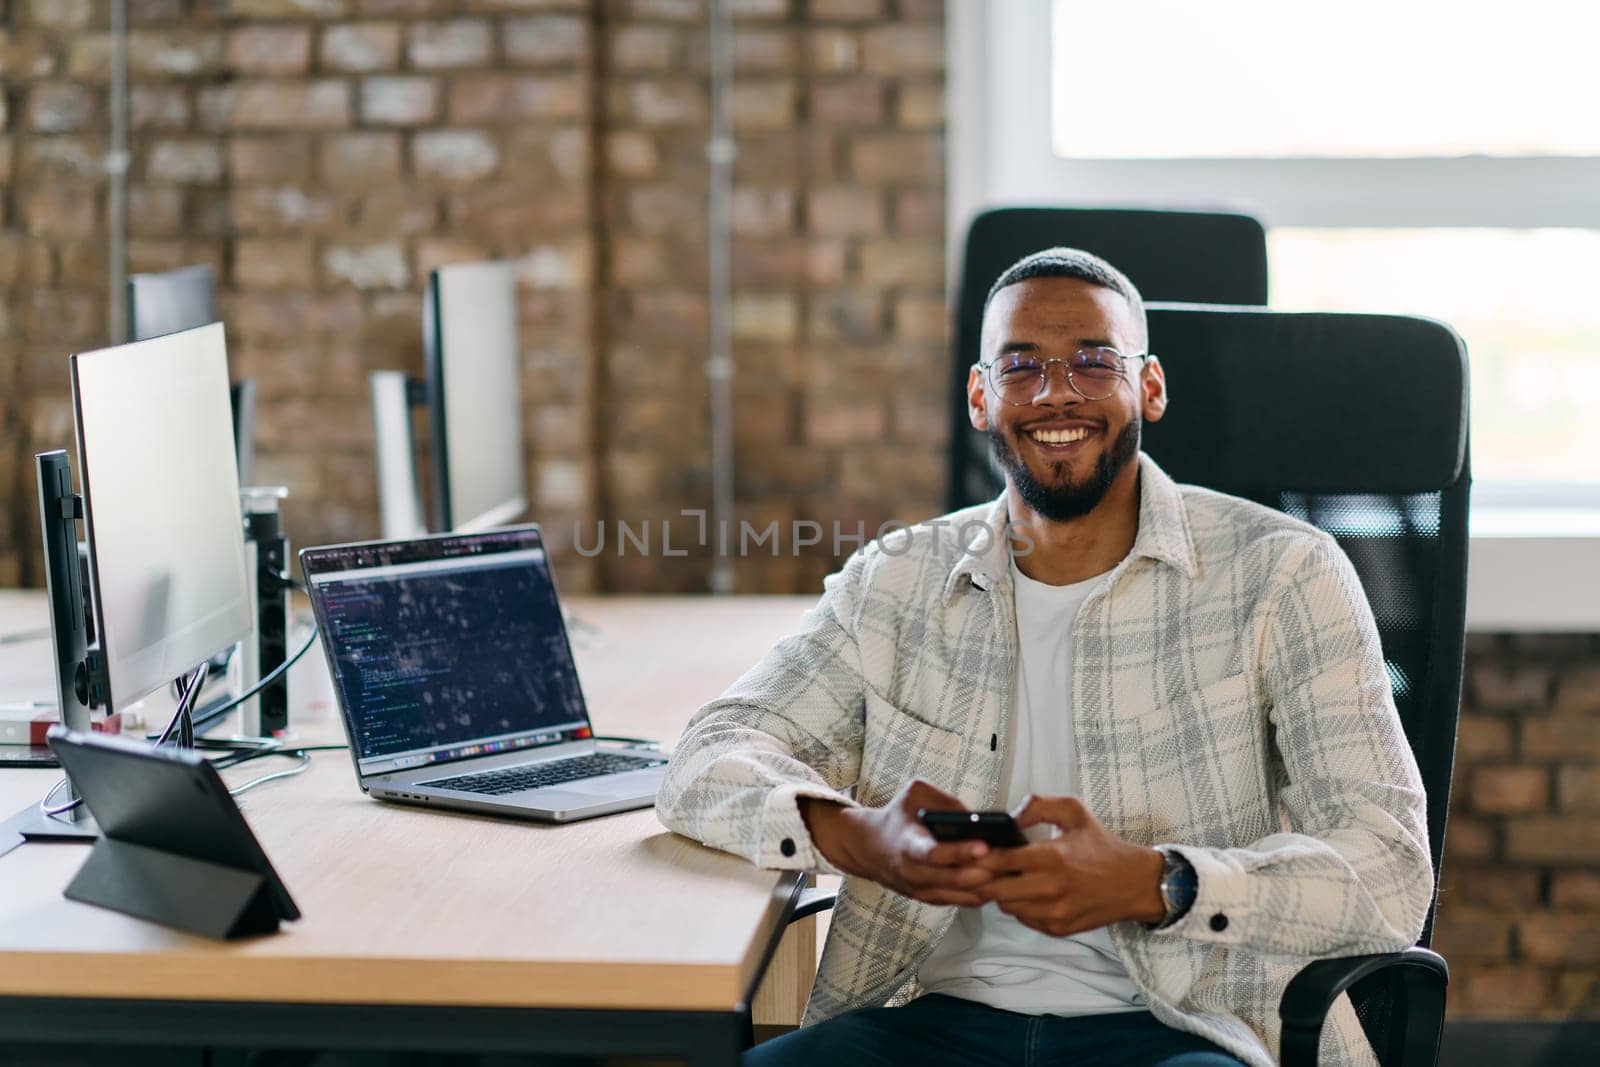 African American entrepreneur takes a break in a modern office, using a smartphone to browse social media, capturing a moment of digital connectivity and relaxation amidst his business endeavors. by dotshock